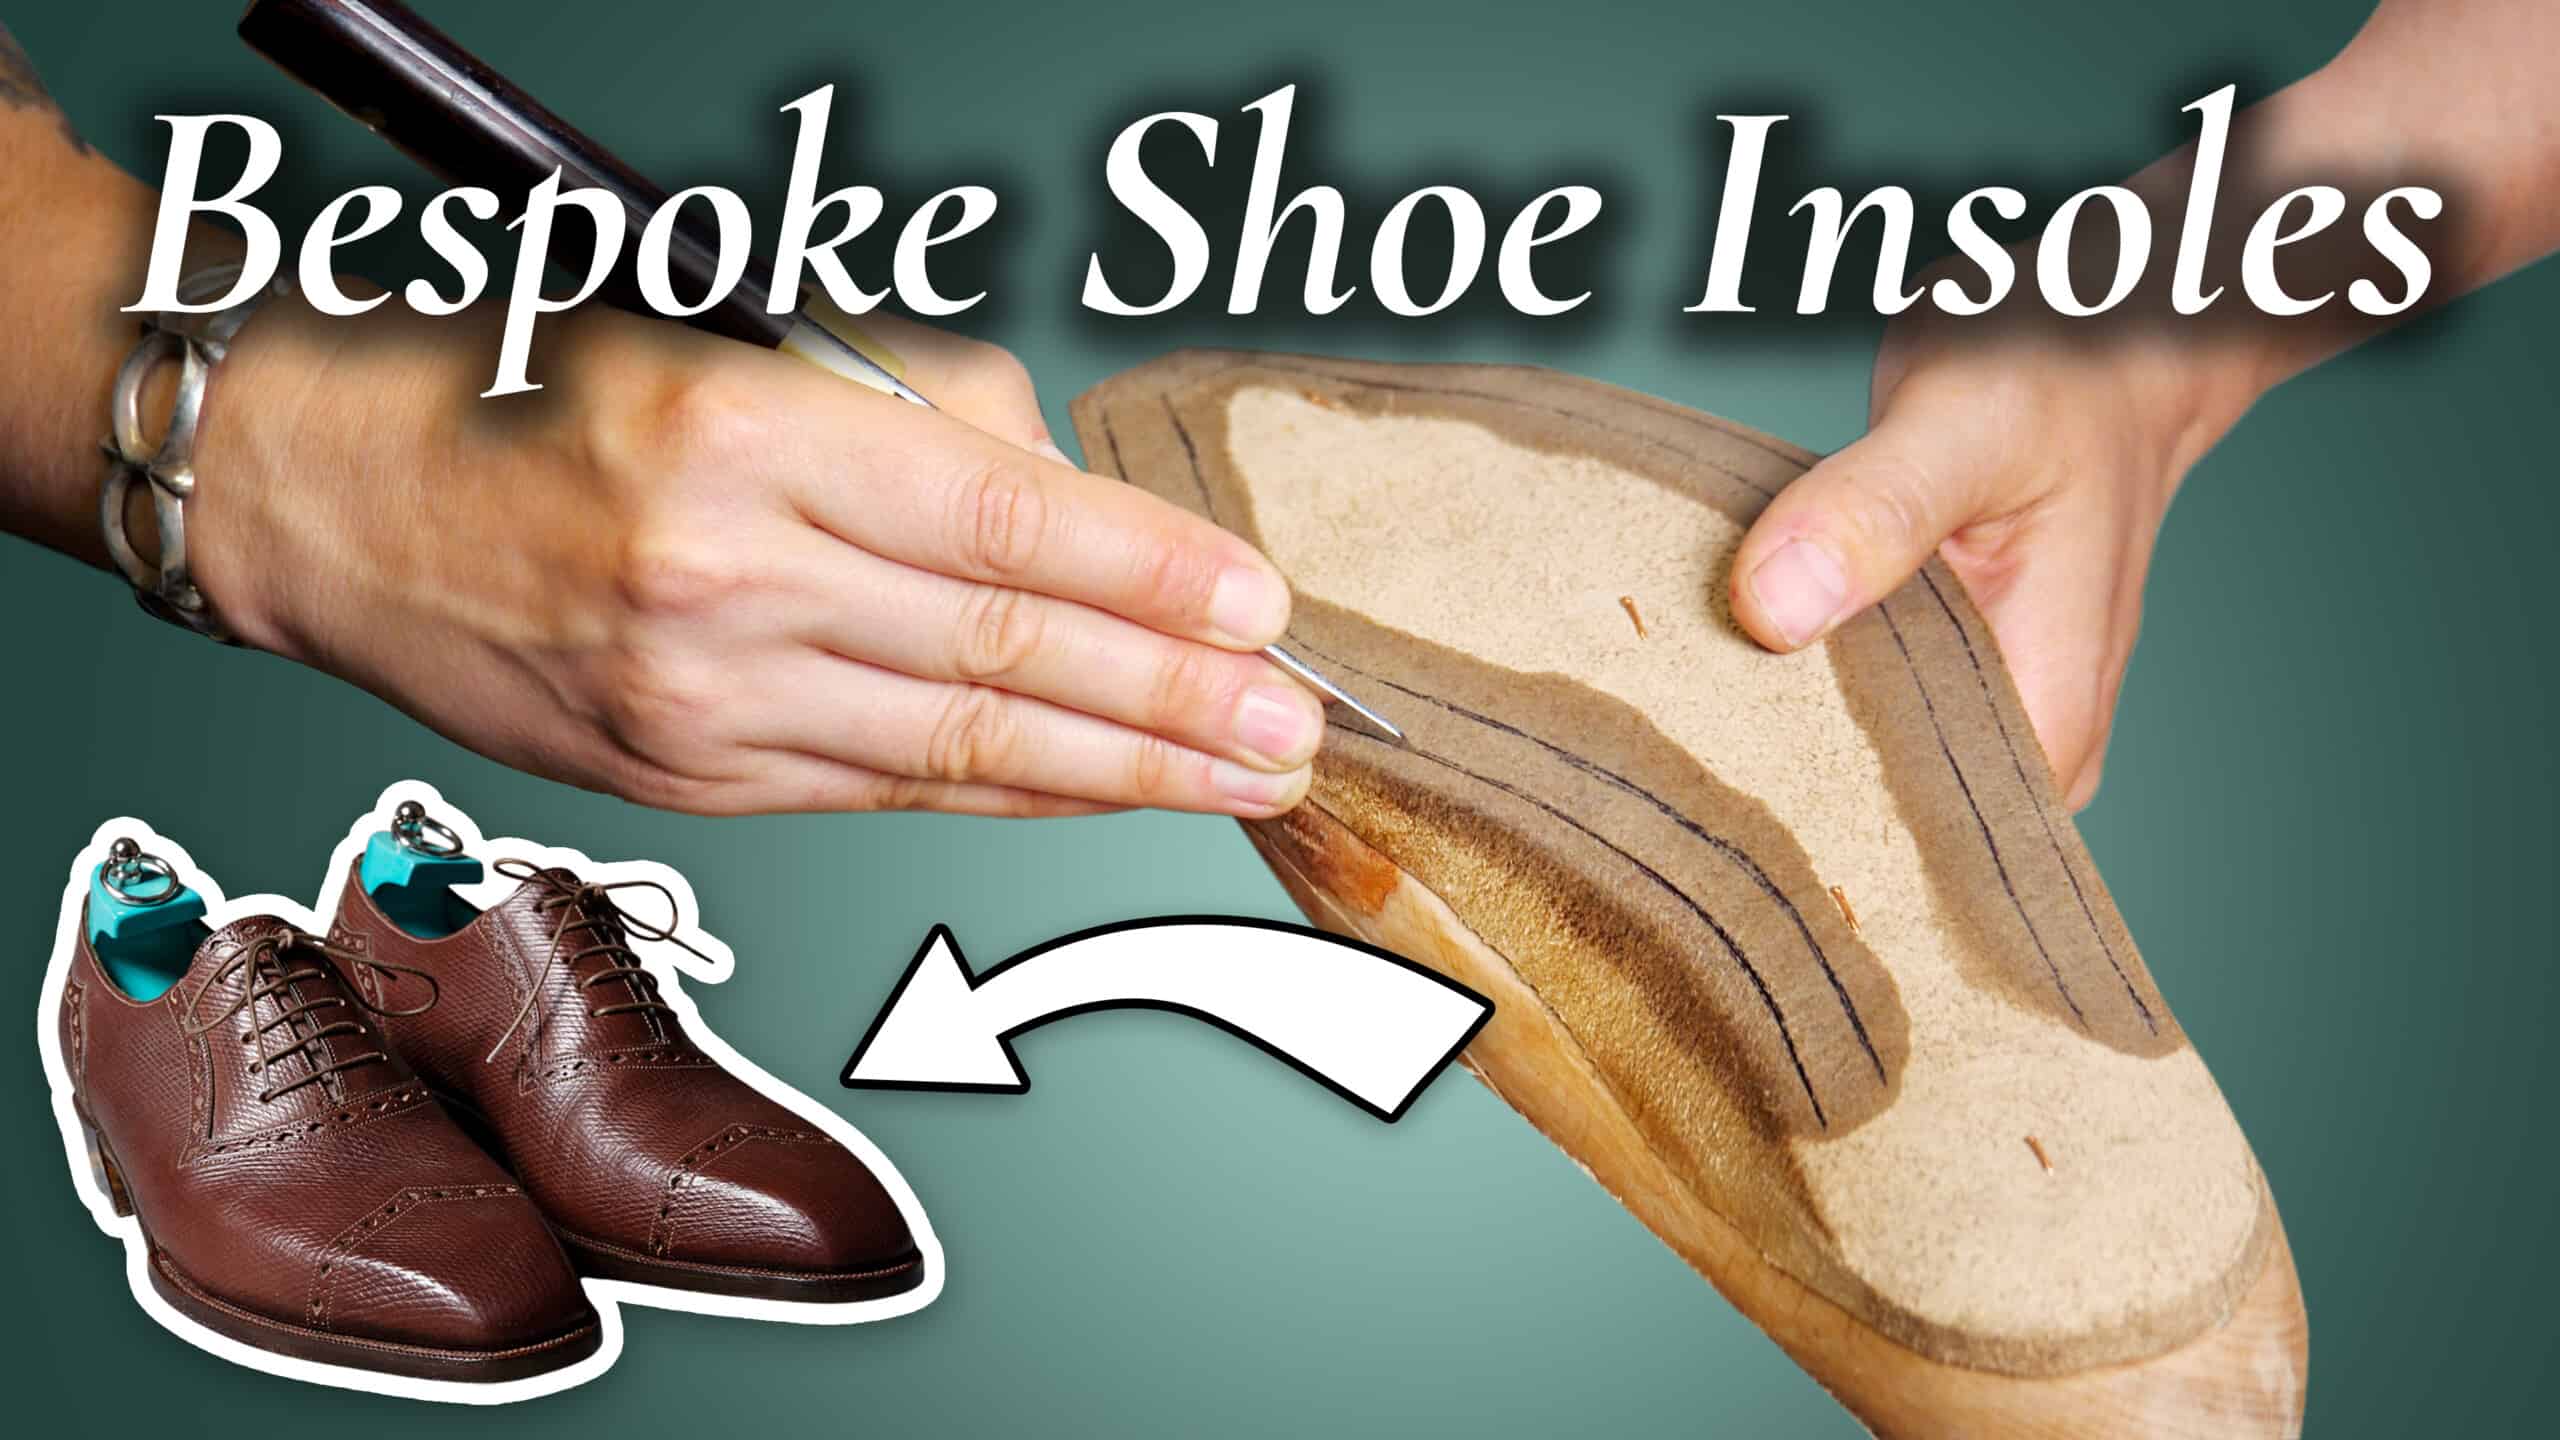 Creating Insoles, The 